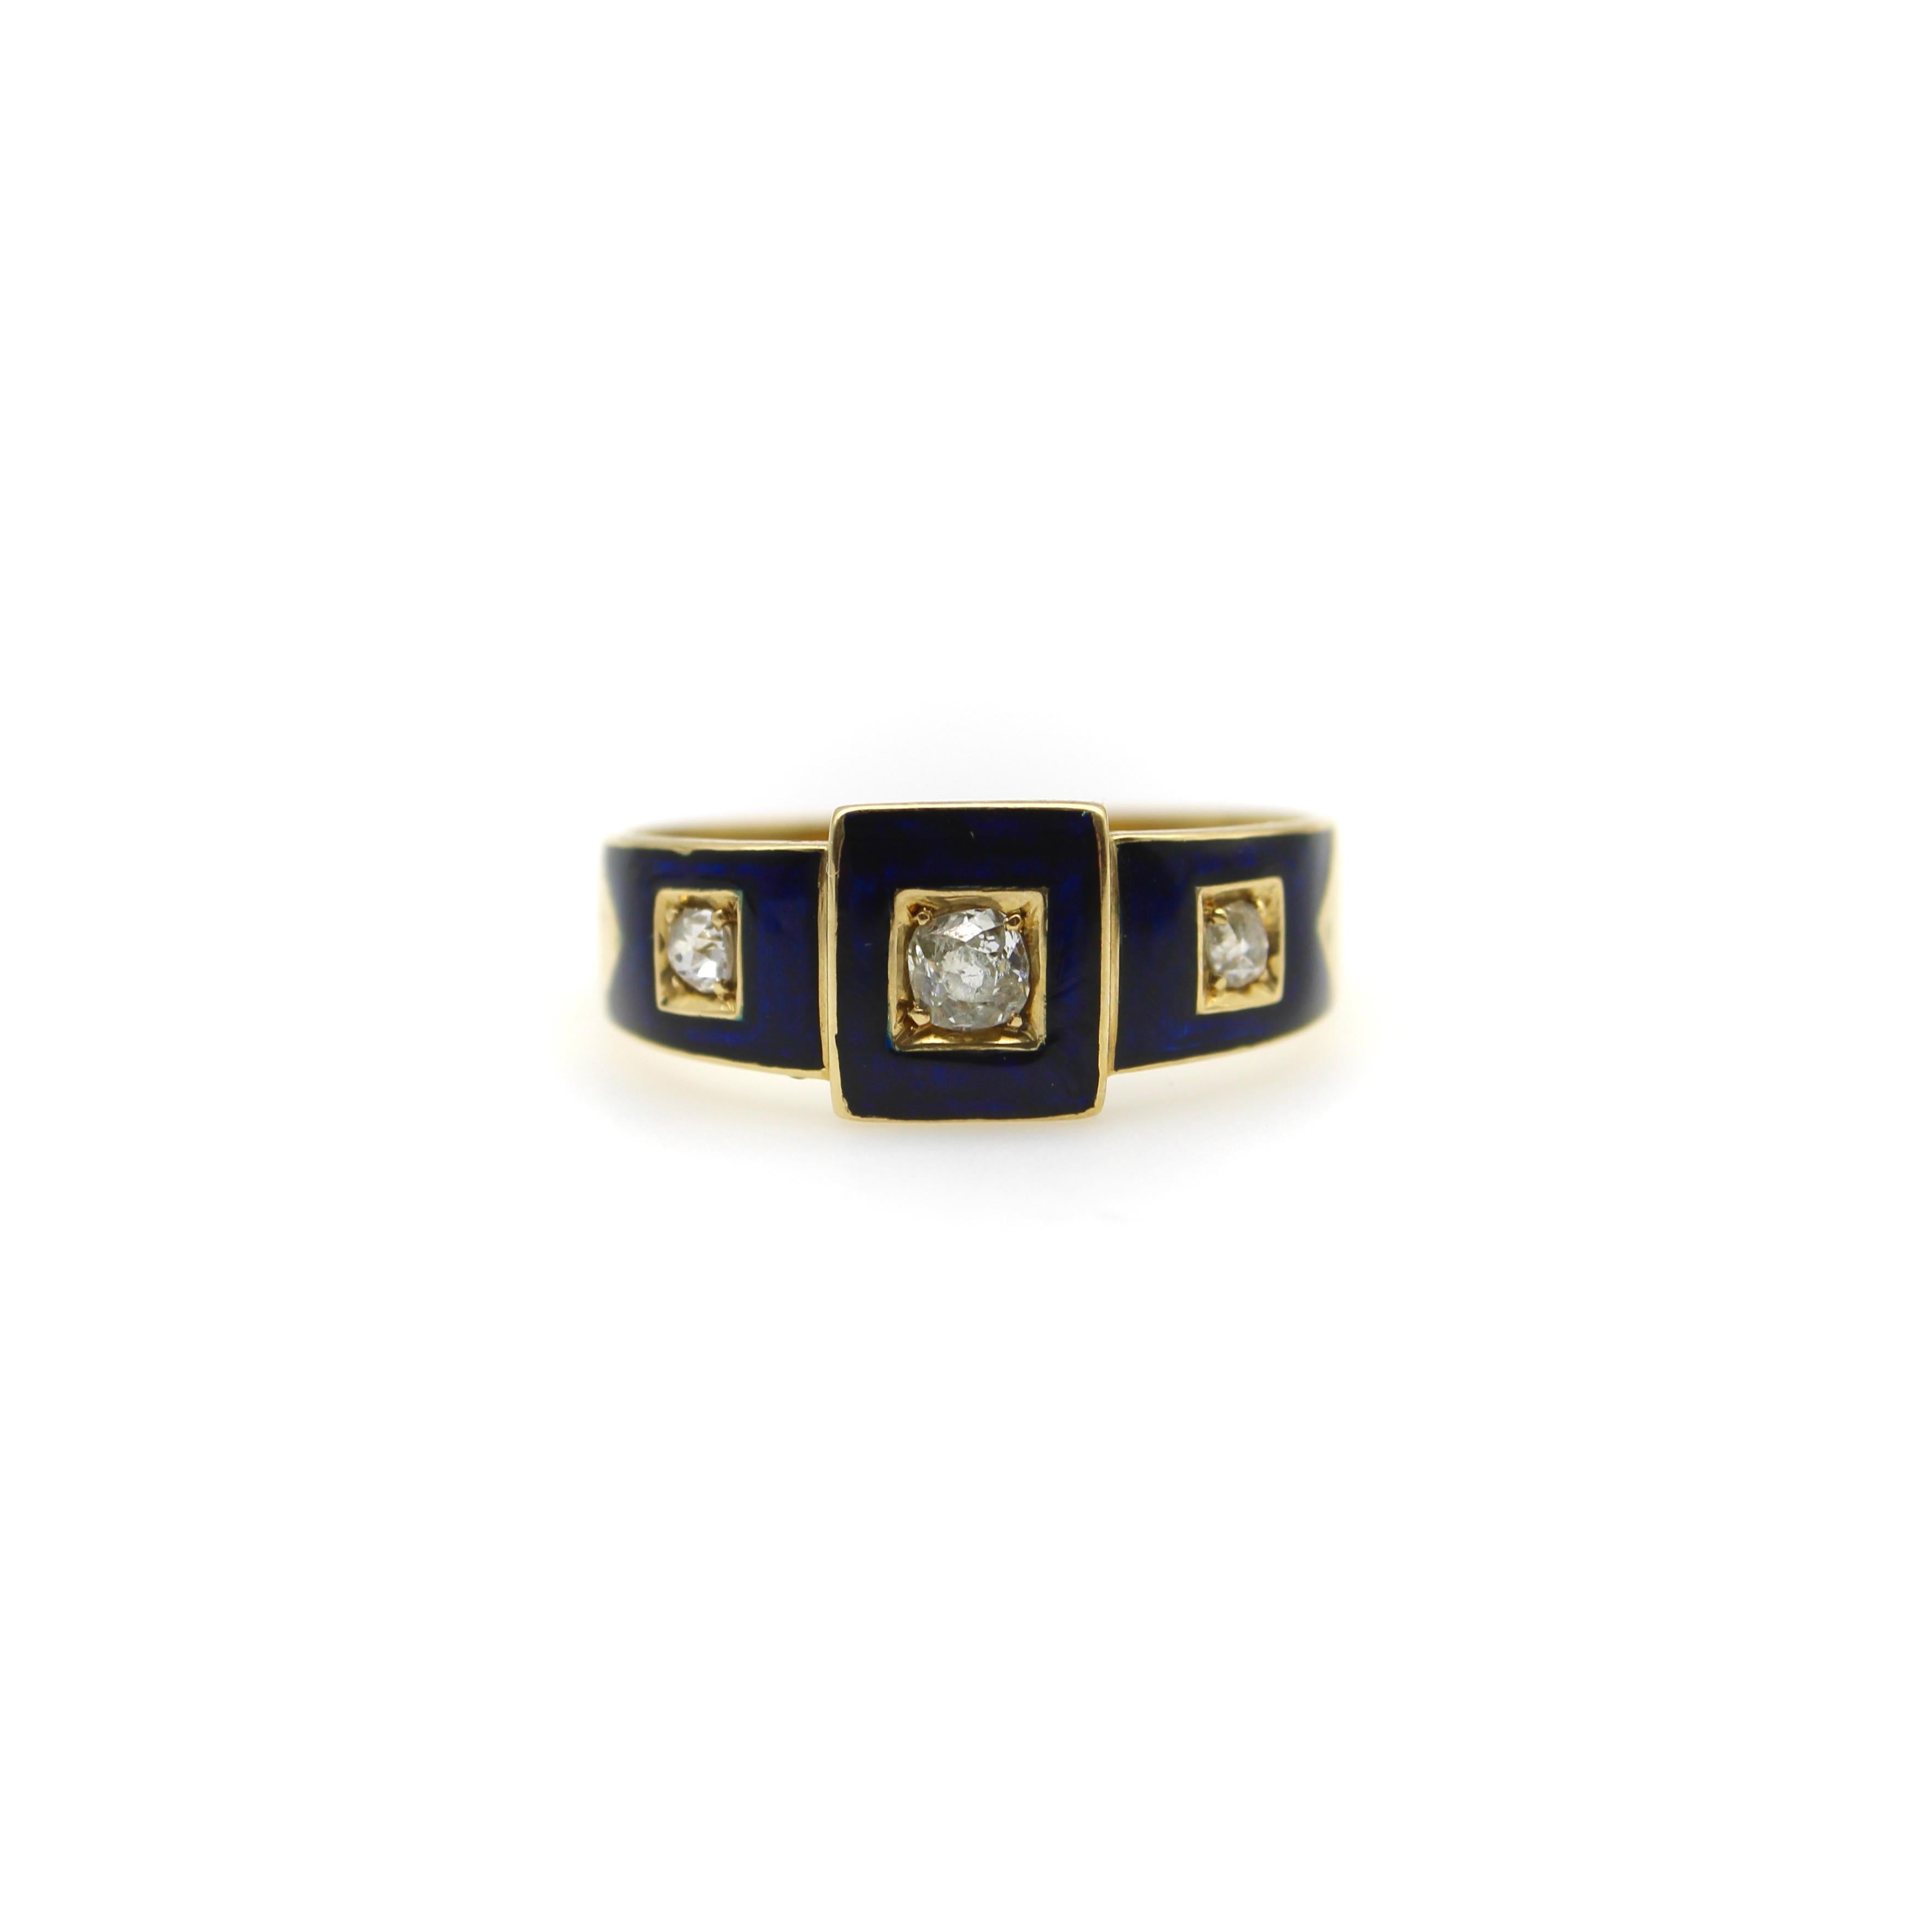 This 18k gold early Victorian ring features three Old Mind Cut diamonds encased in blue enamel square details. The diamonds are housed in a square, carved out setting in the 18k gold that creates a gorgeous contrast against the navy blue. The center